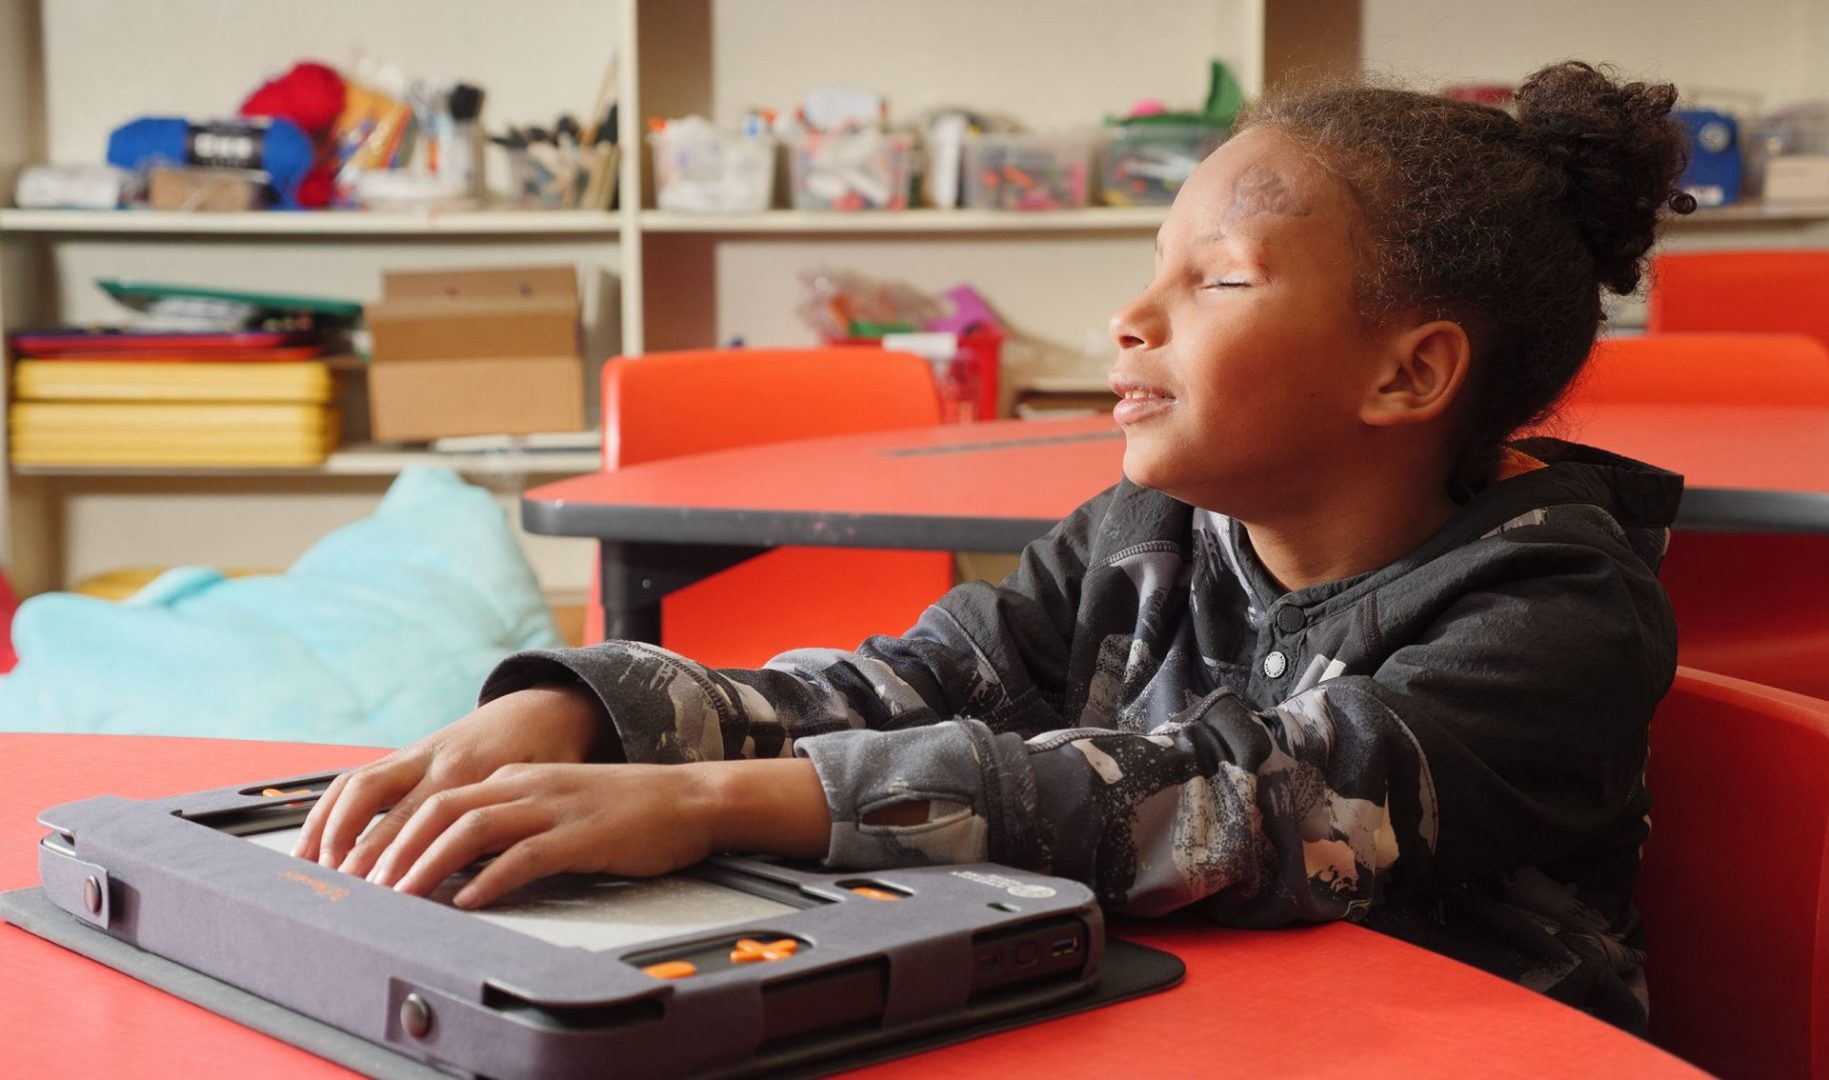 An elementary school-aged boy sitting at a table in a classroom looks pleased as he uses both hands to touch the Monarch’s multiline braille display.